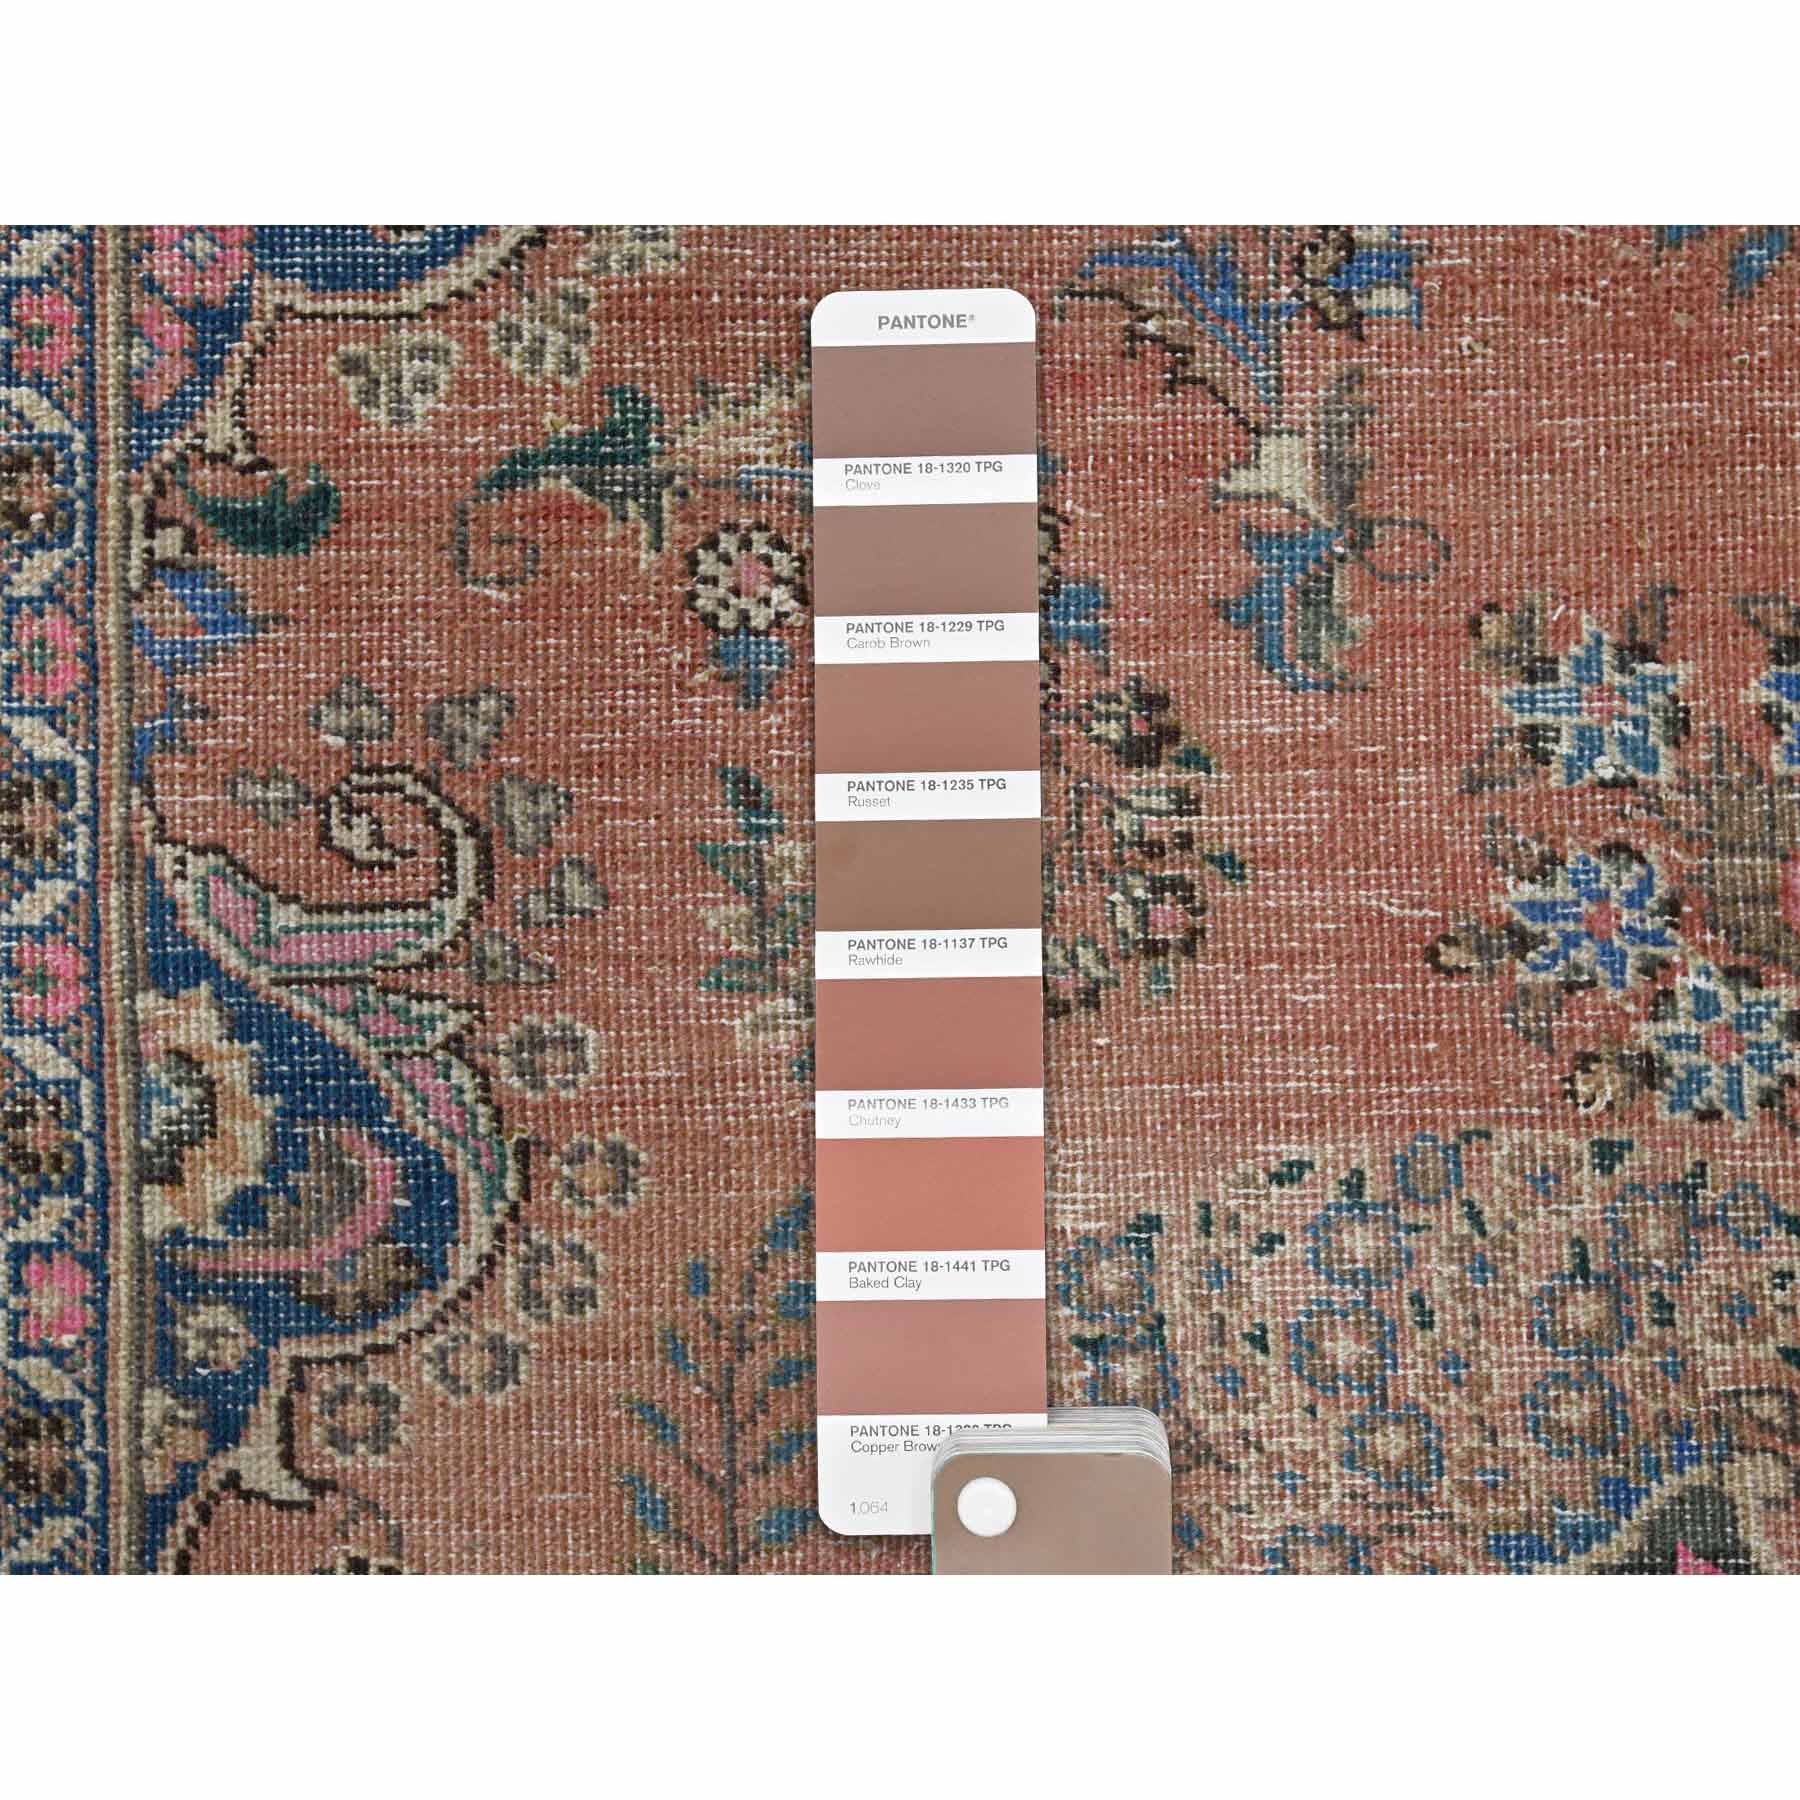 Overdyed-Vintage-Hand-Knotted-Rug-309865